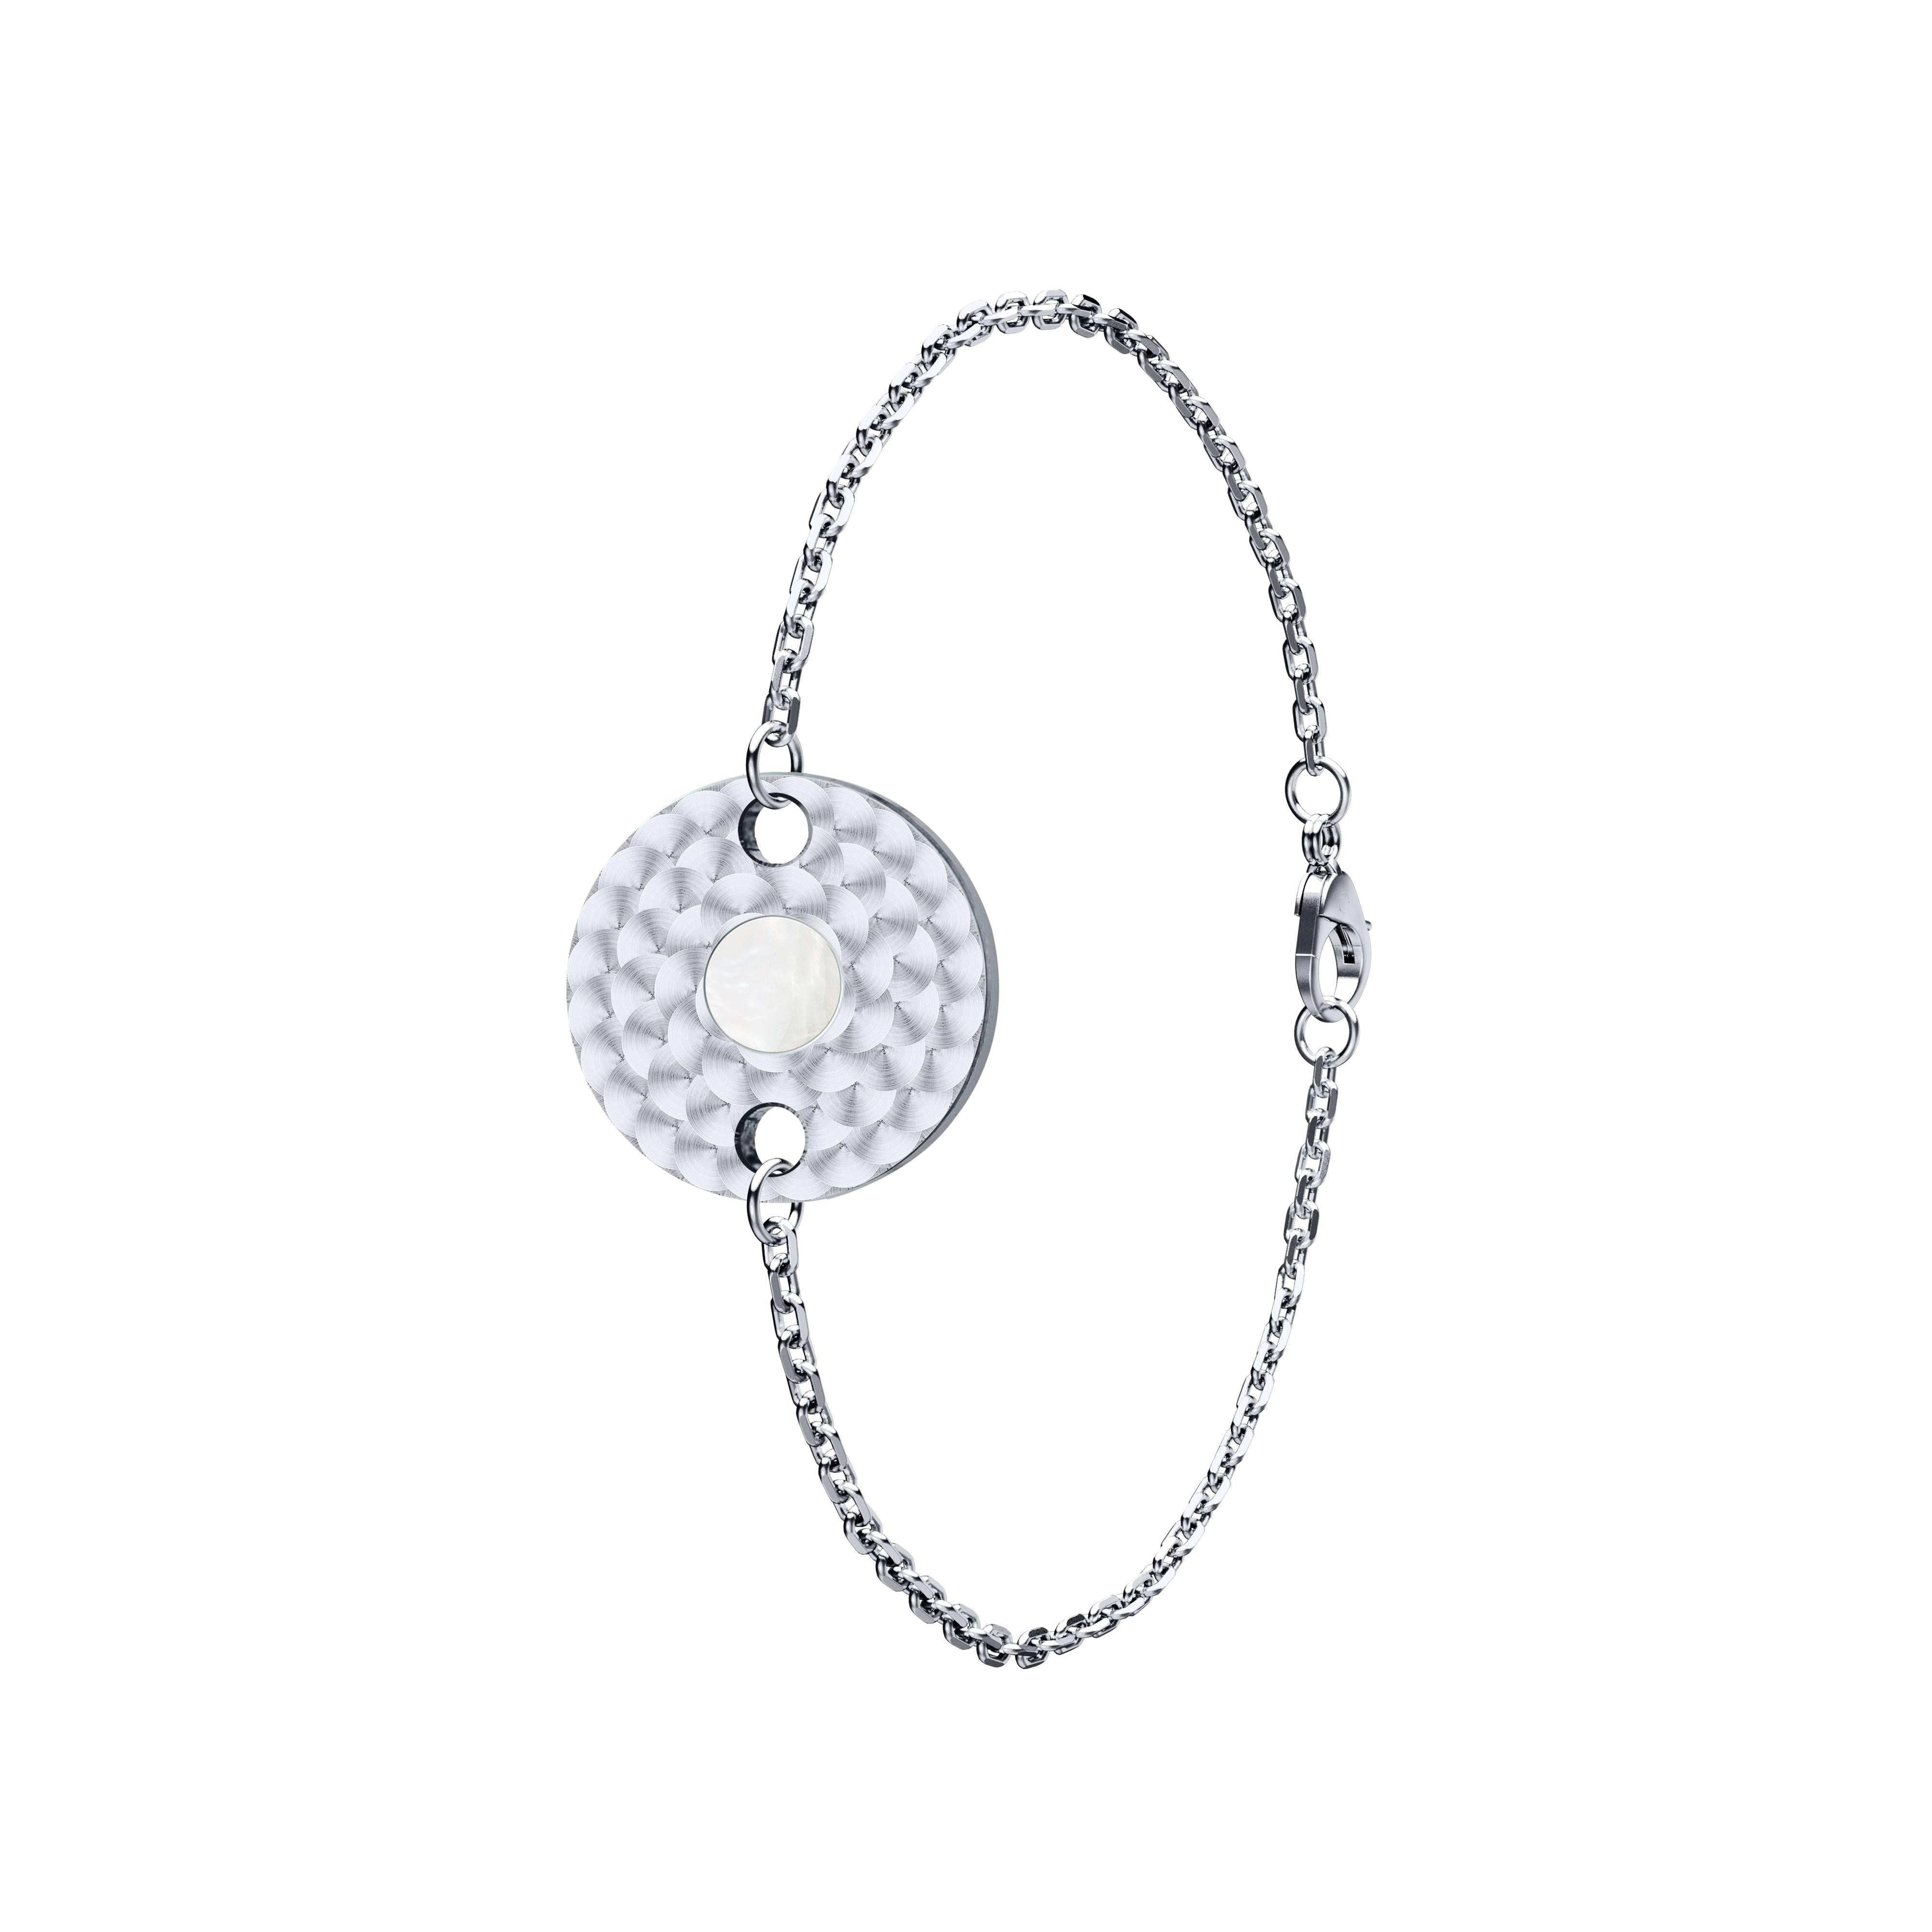 B.R.M Dolce Vita Twice (2 in 1) bracelet 18 Carats gray gold Spotting circle and onyx stone is an exquisite work of art. It can be worn in two ways. It comes with onyx stone on one side, and adorned with mother of pearl, a symbol of serenity on the